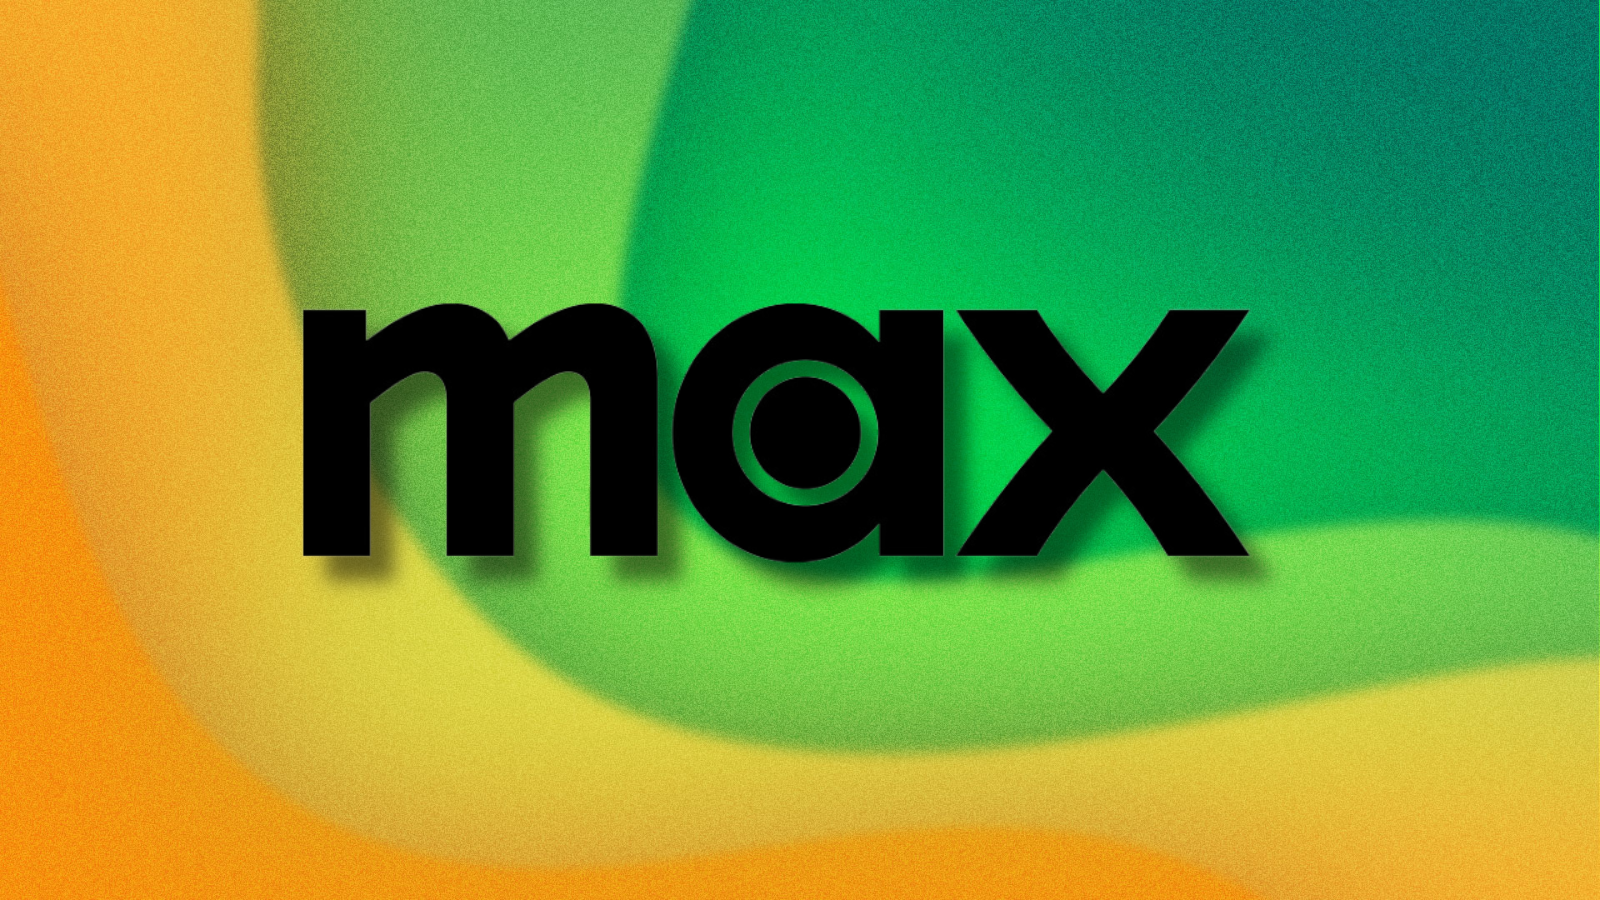 Max logo on green and yellow abstract background